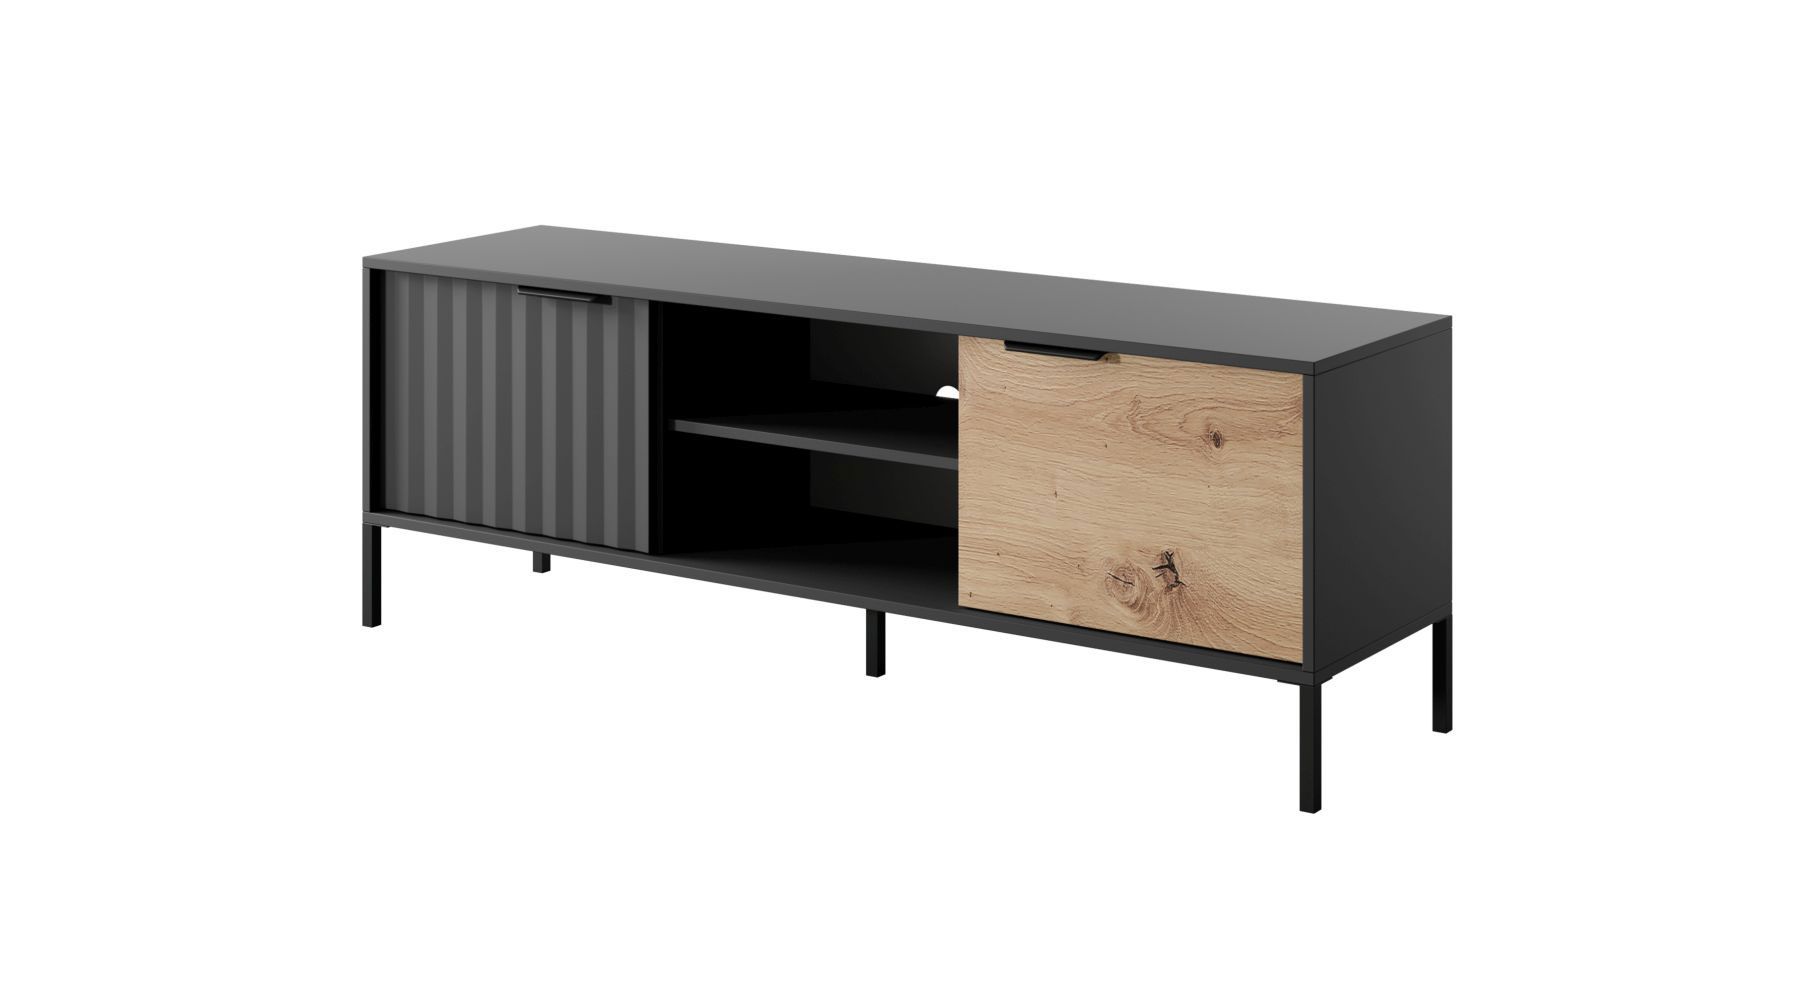 TV cabinet with four compartments and soft-close system Fouchana 13, color: black / oak Artisan - Dimensions: 53 x 153 x 39.5 cm (H x W x D)